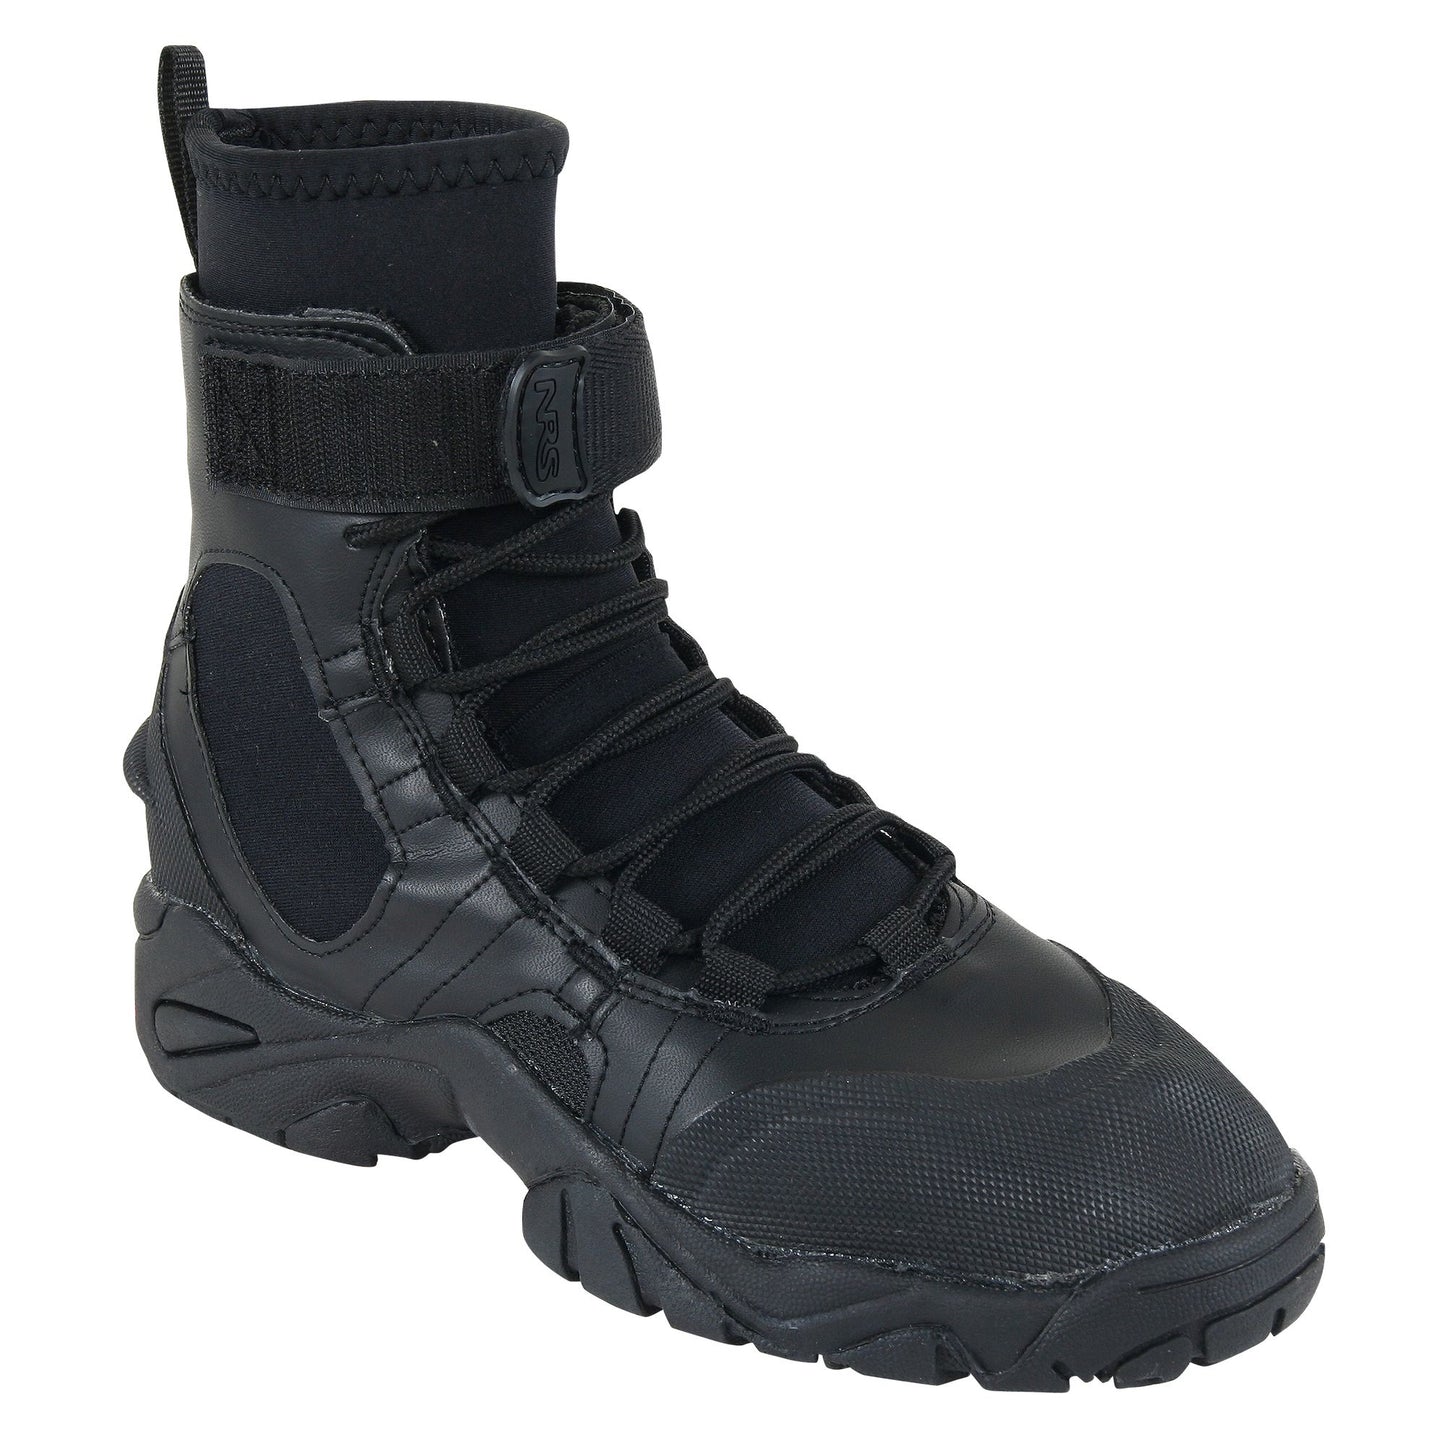 NRS Workboot Wetshoes (Old Style Closeout)